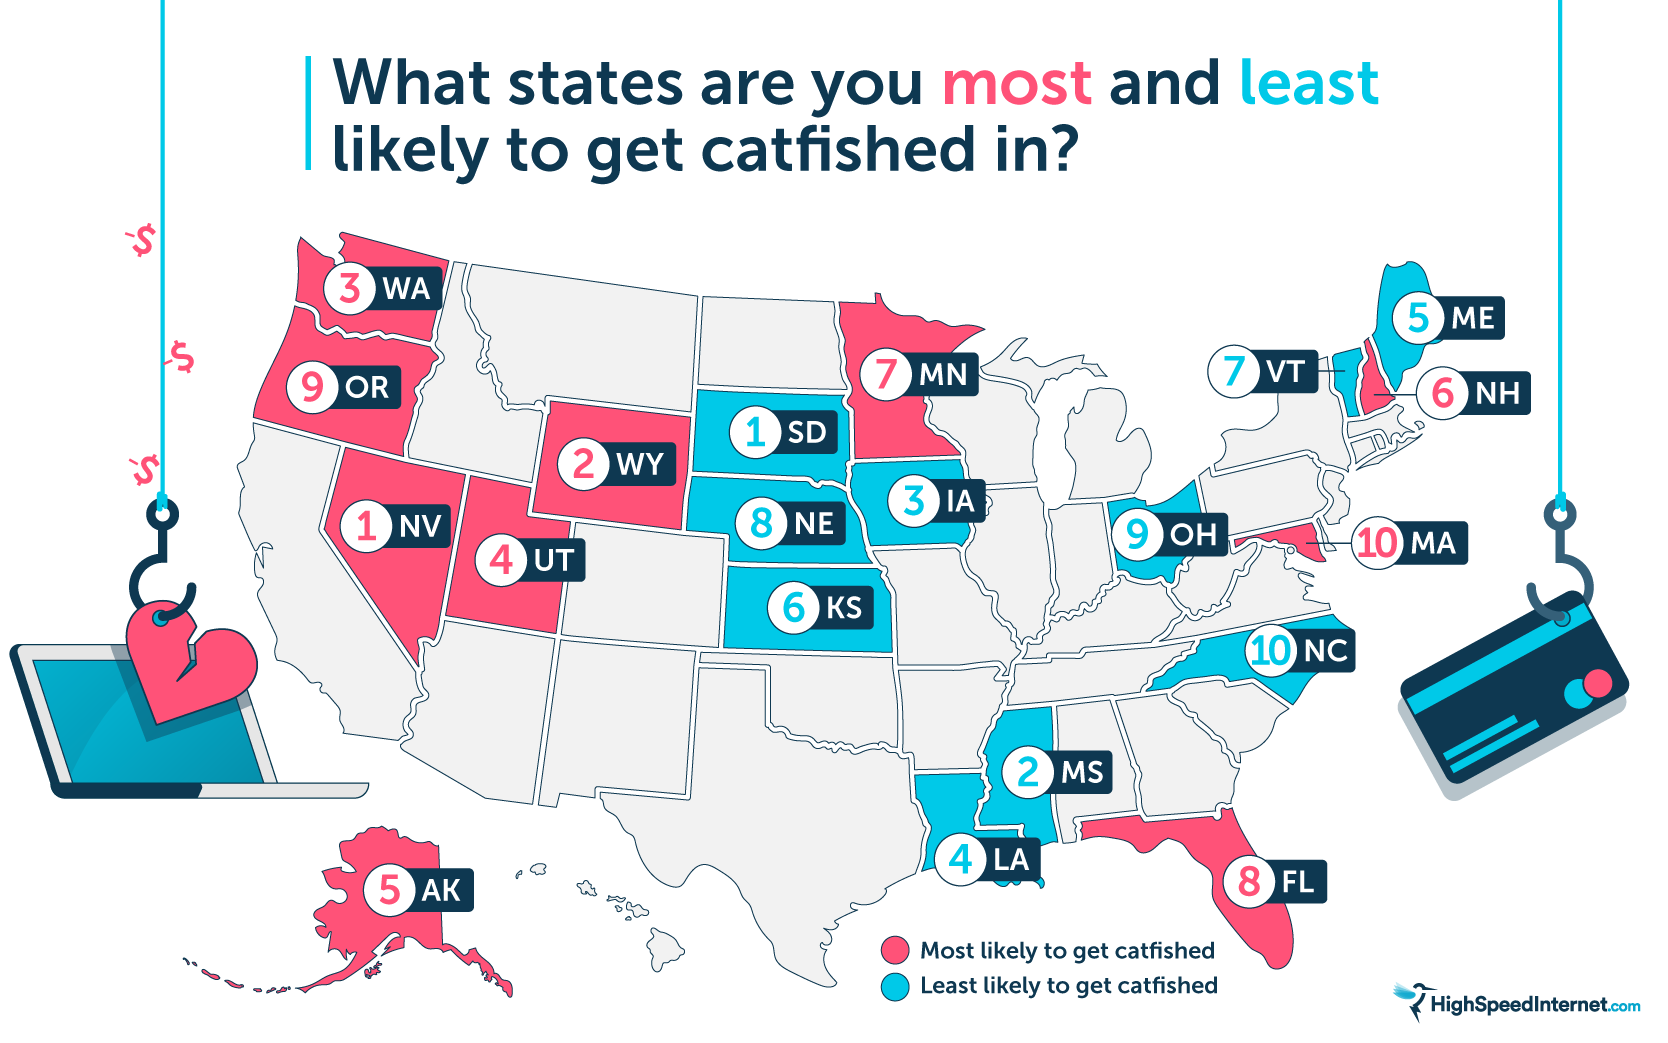 What states are you most and least likely to get catfished in?